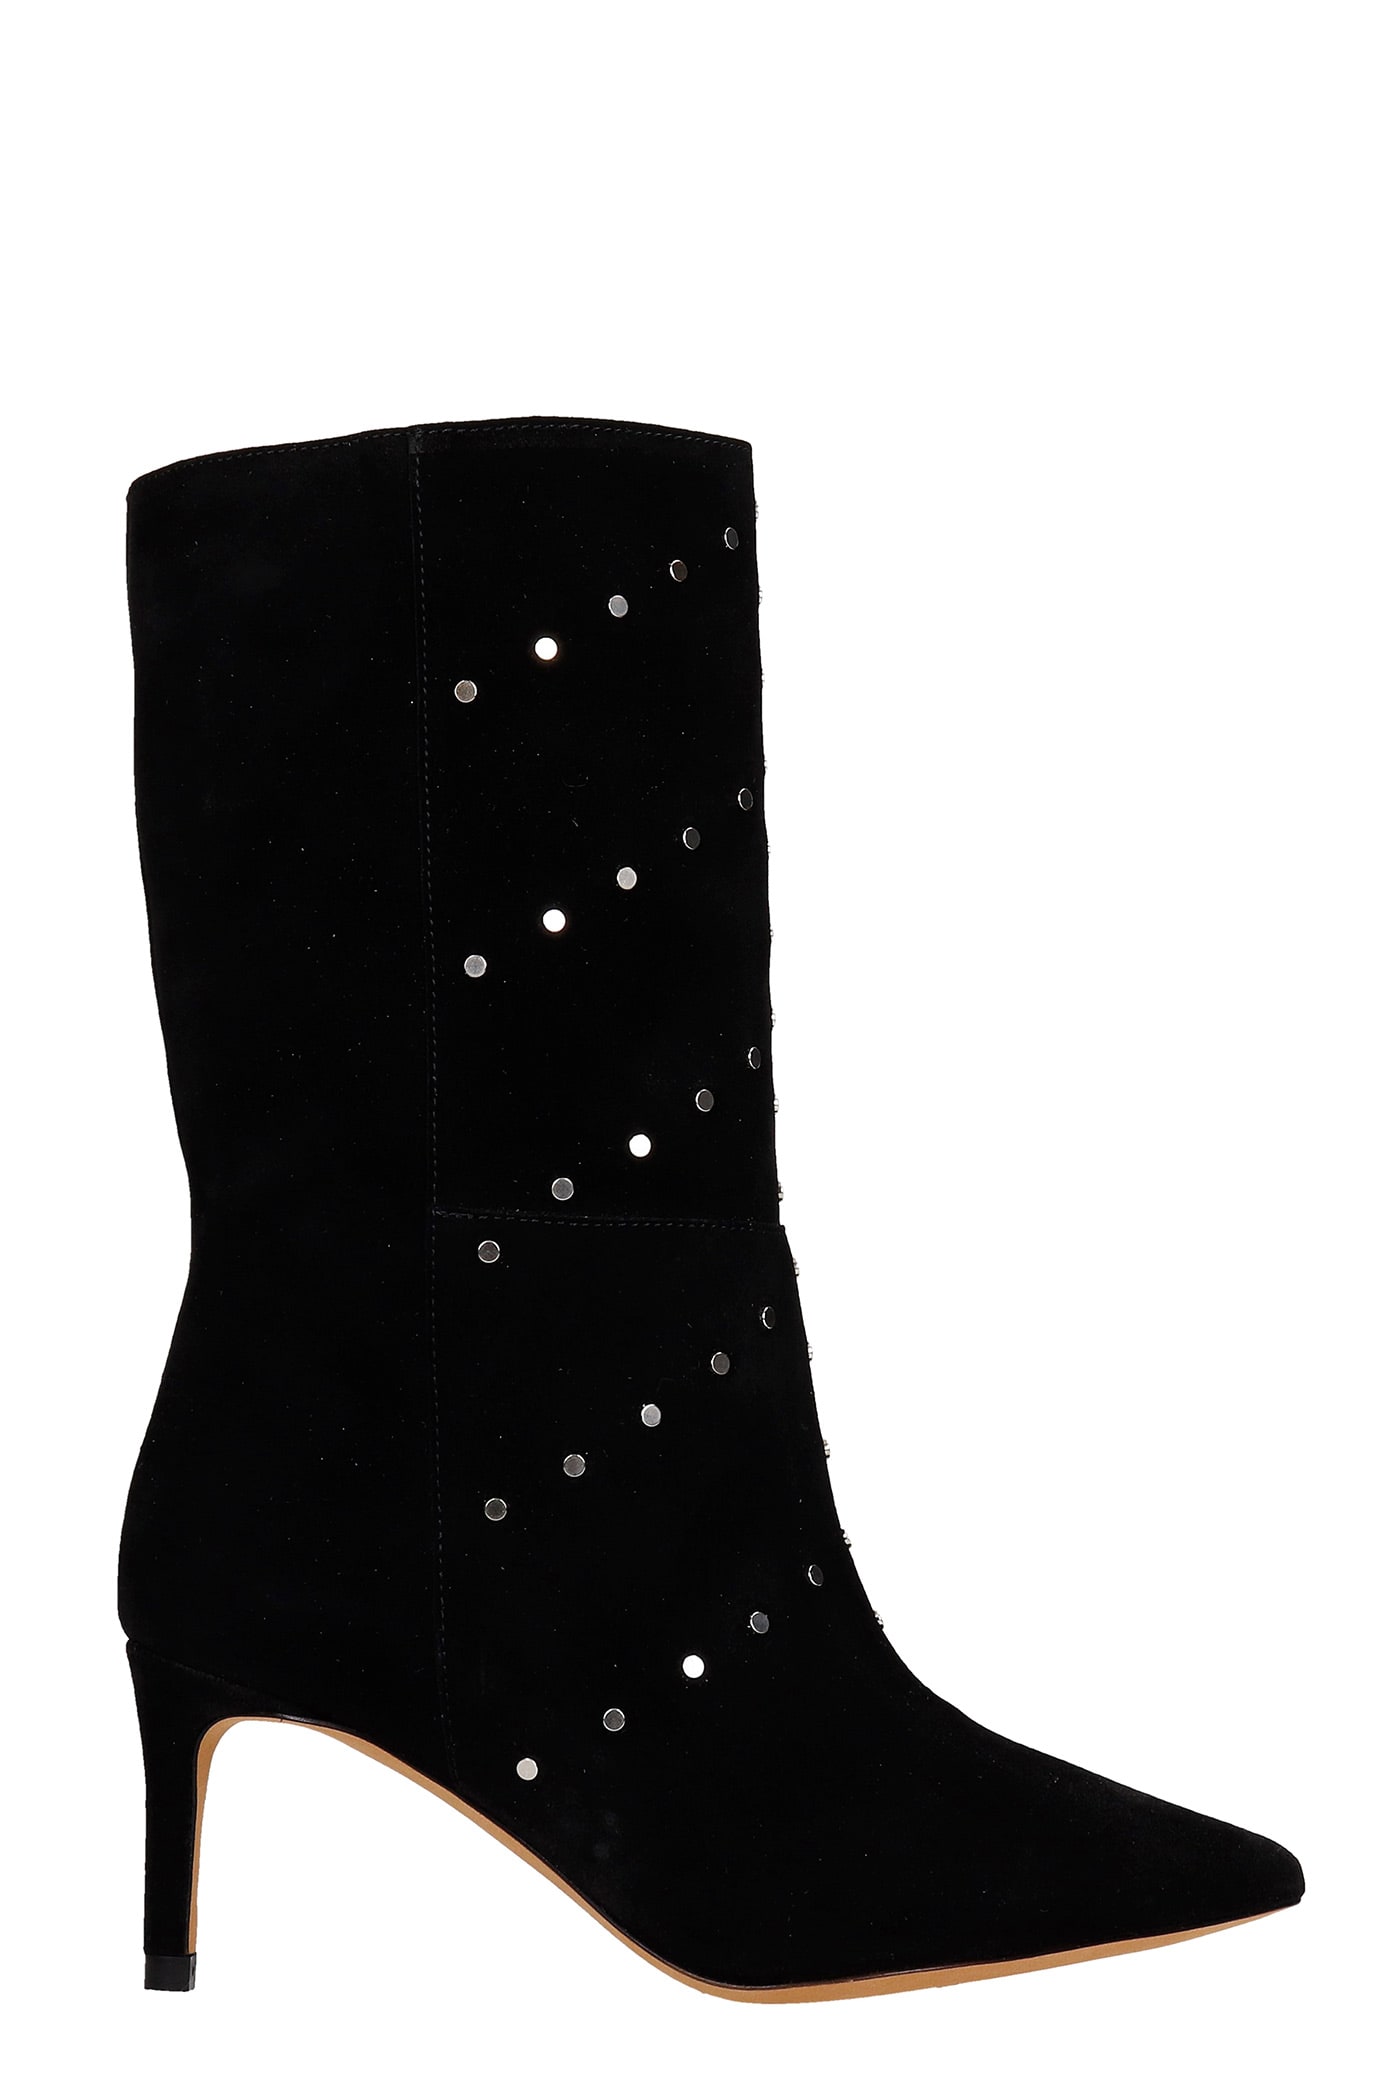 IRO Milow High Heels Ankle Boots In Black Suede